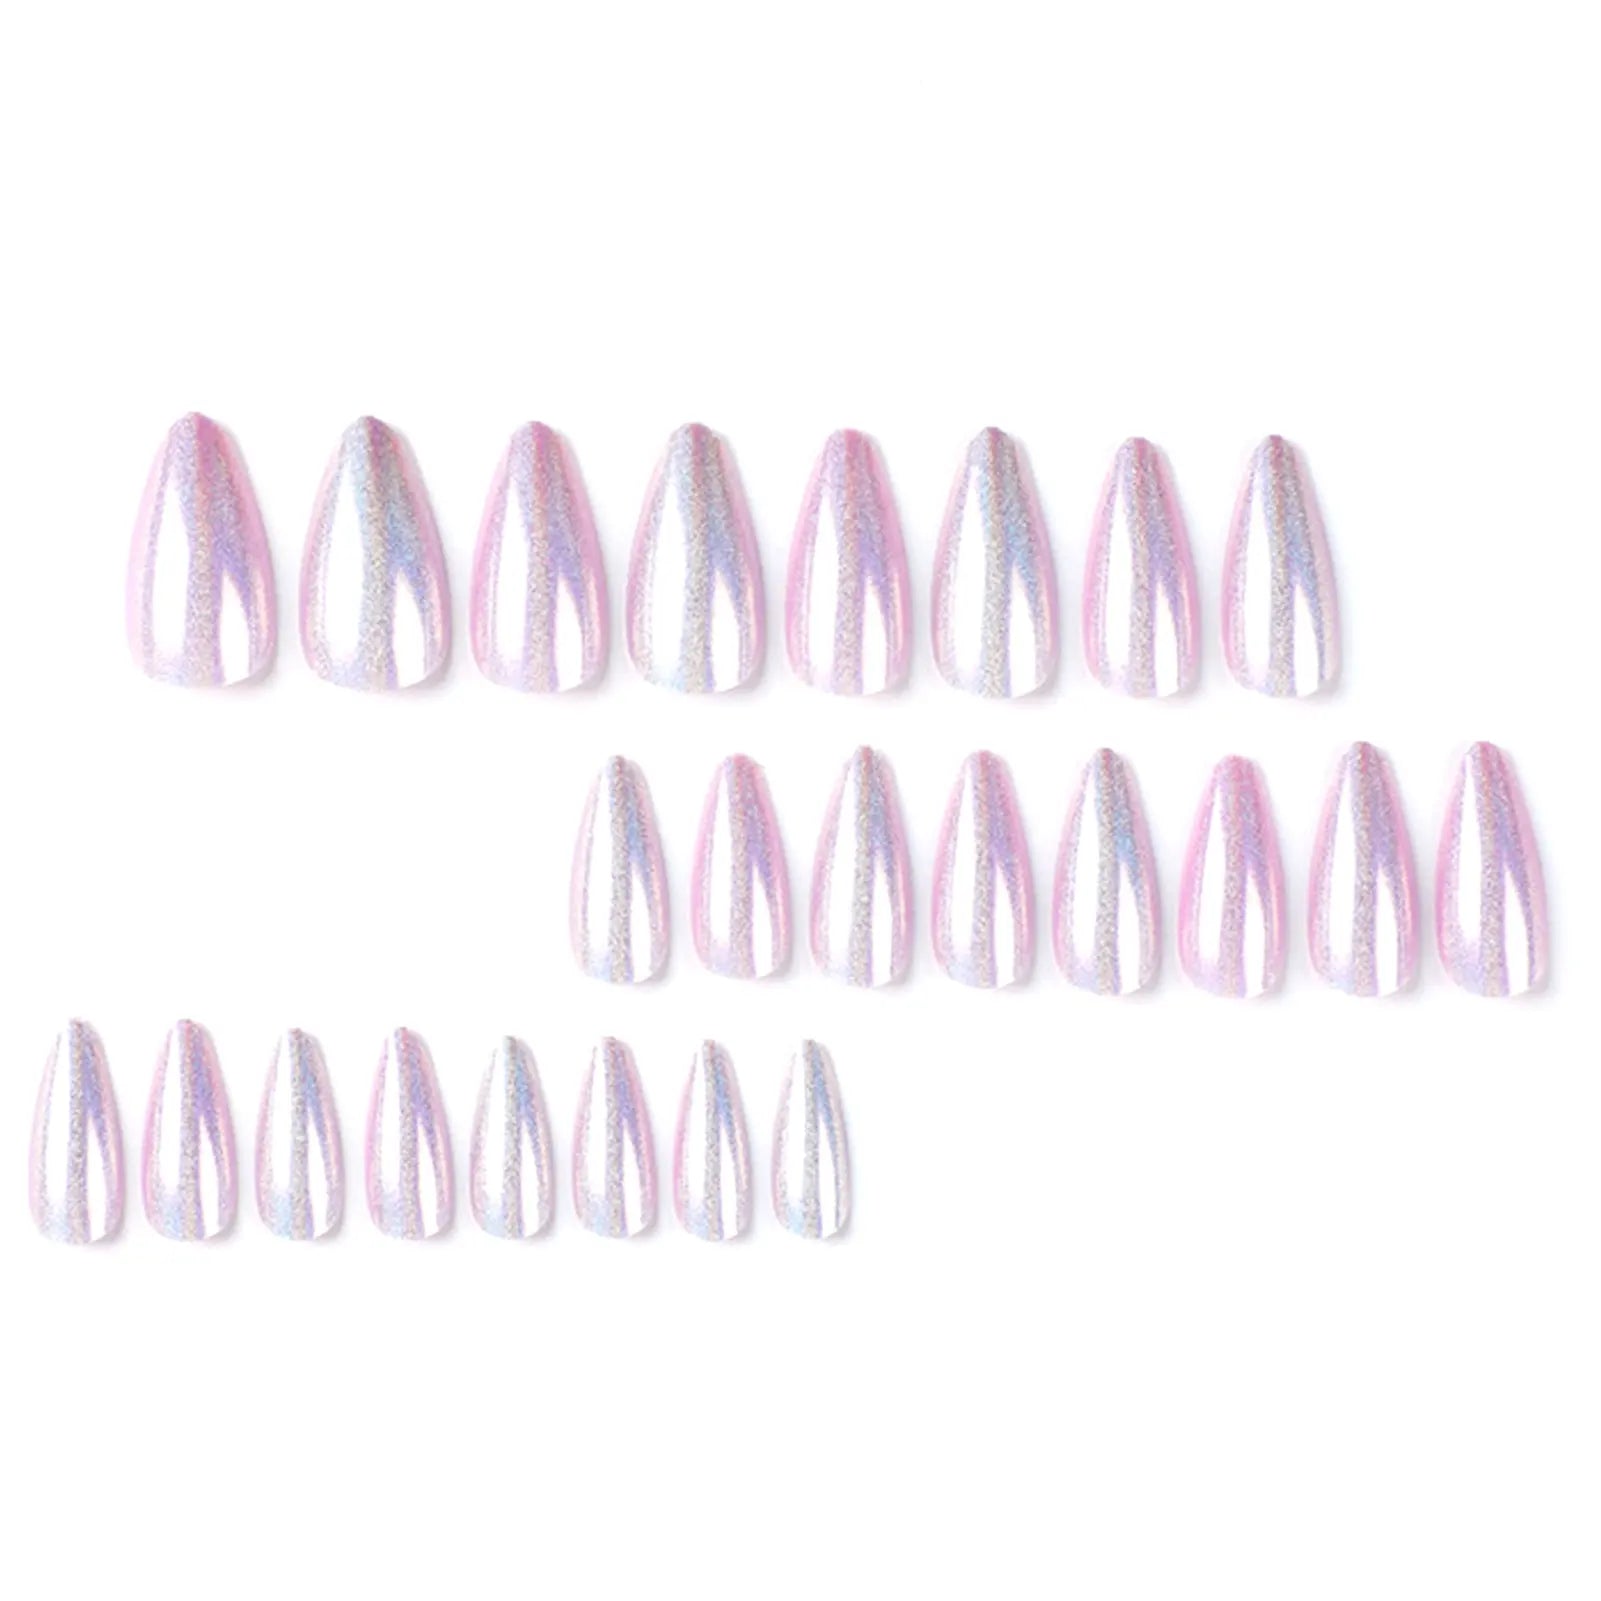 Simple Aurora False Nails with Premium Eco-Friendly Resin Material for Professional Nail